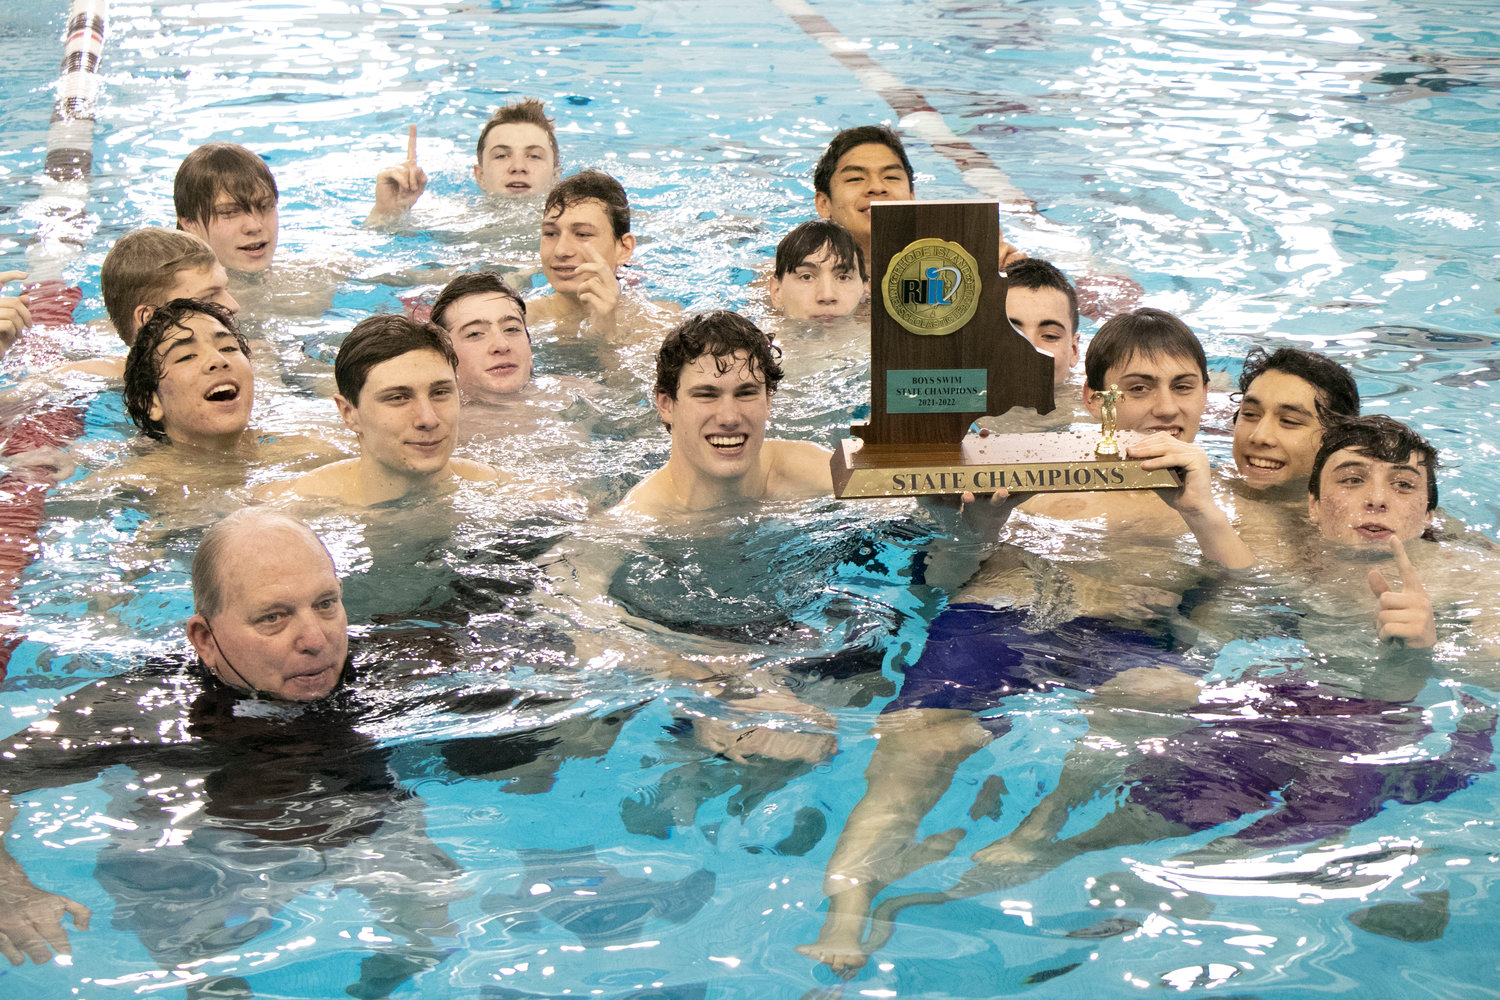 The Barrington High School boys swim team won the state championship on Saturday morning, March 5, at Brown University. Here, Coach Sandy Gorham holds the state championship trophy surrounded by members of the boys team.